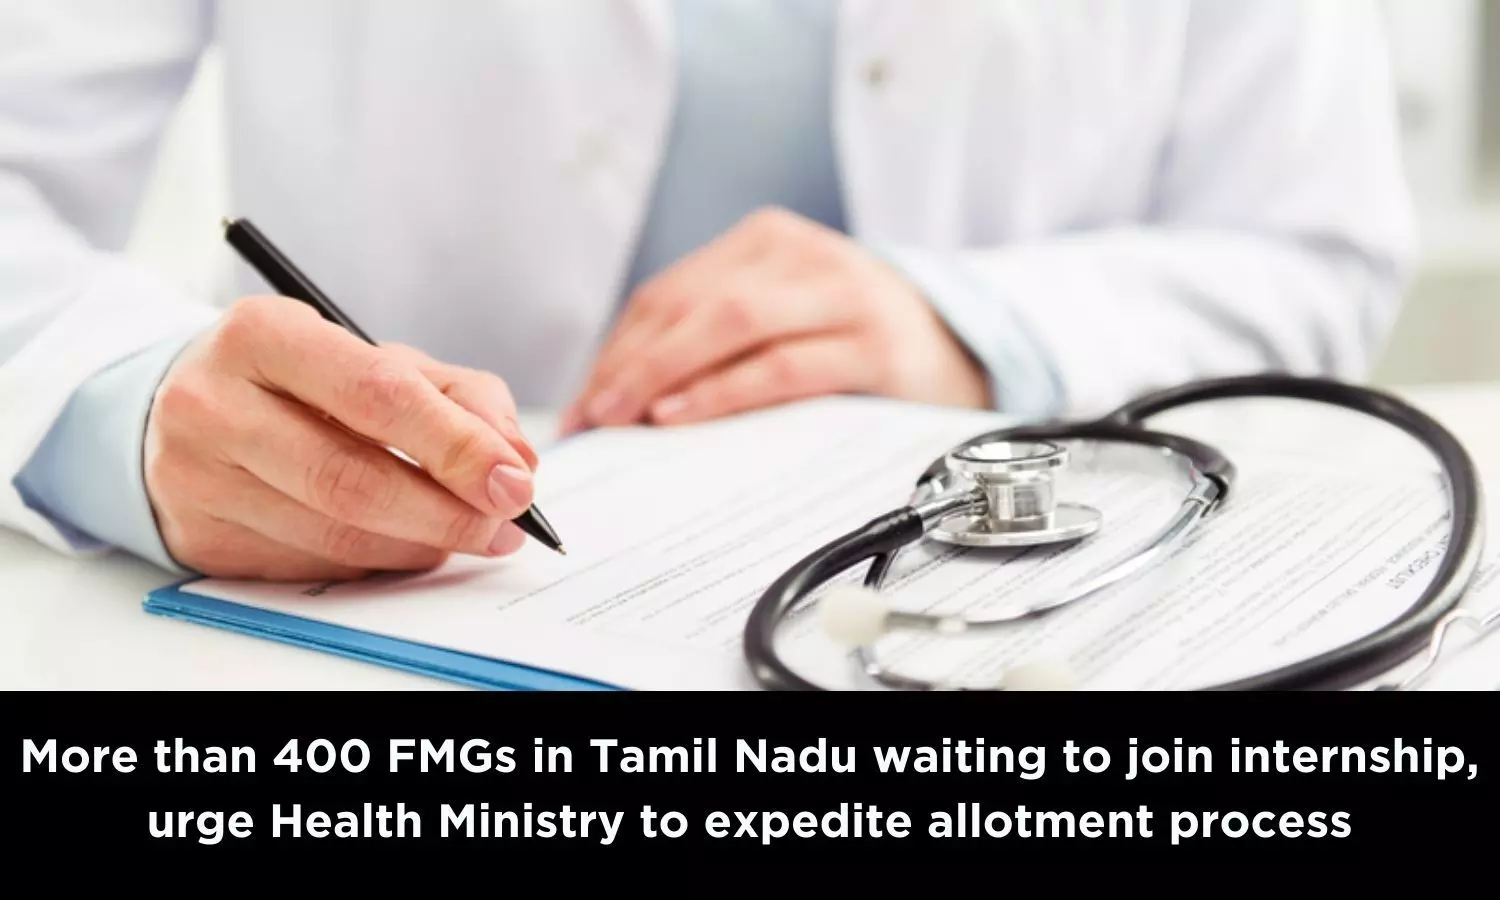 Over 400 FMGs waiting to join internship in Tamil Nadu: FMG Wing of TNMSA urge Health Ministry to expedite allotment process